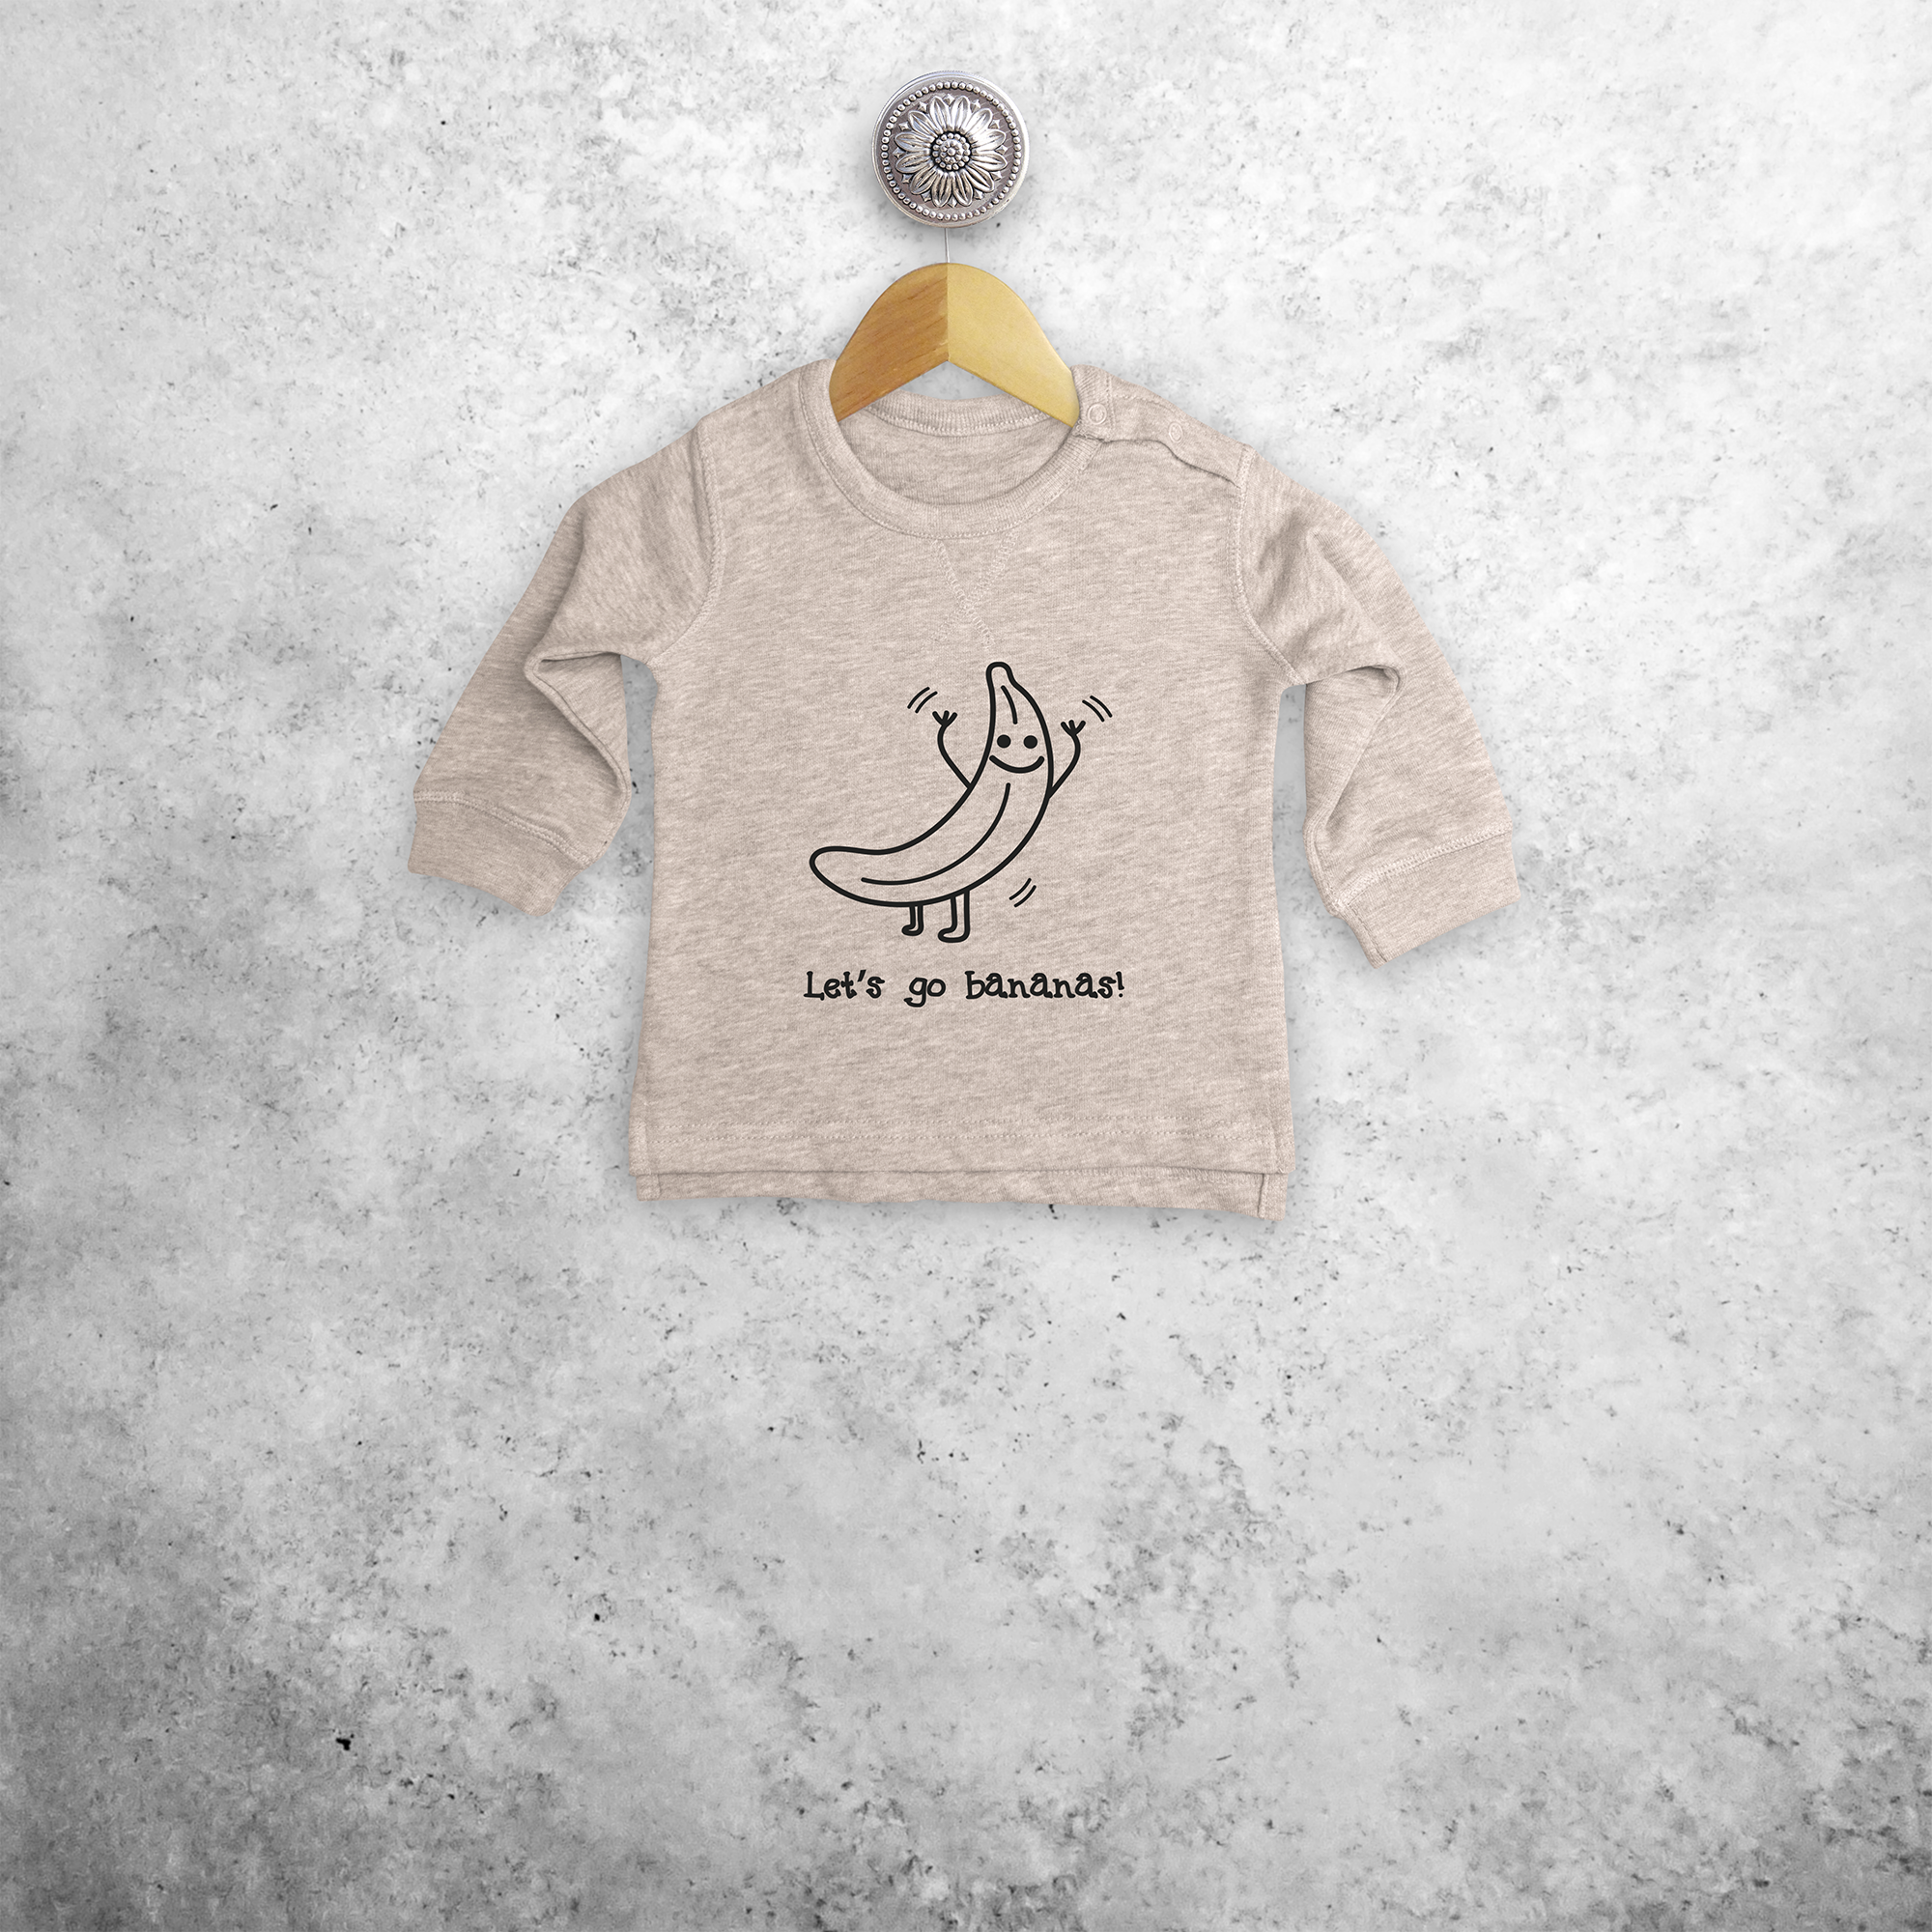 'Let's go bananas' baby sweater